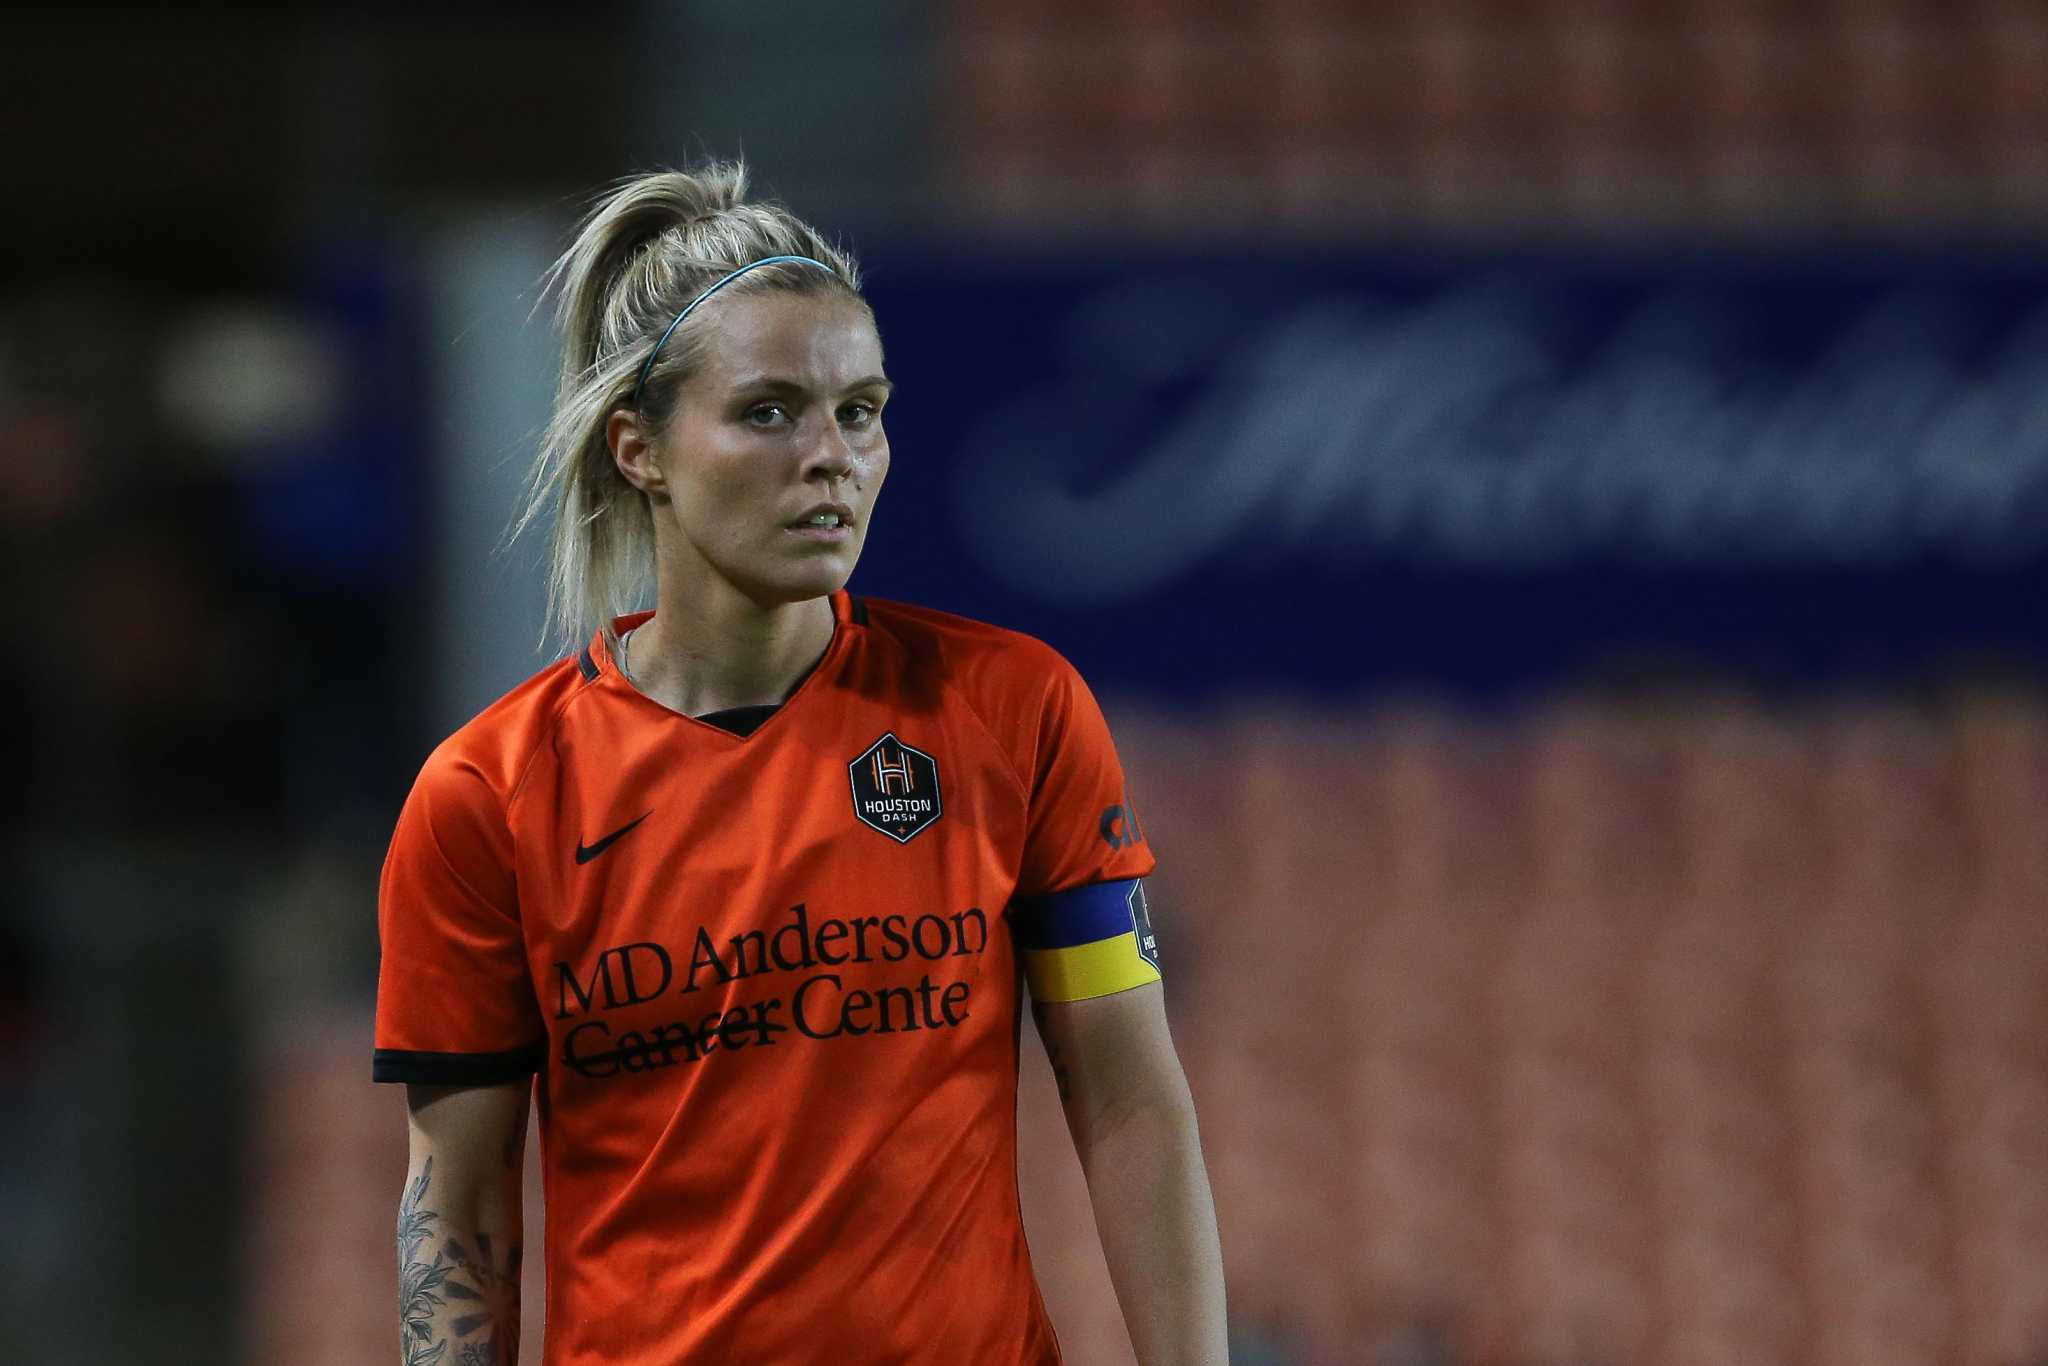 Houston Dash goes down to 10 players and fall 1-0 on the road to